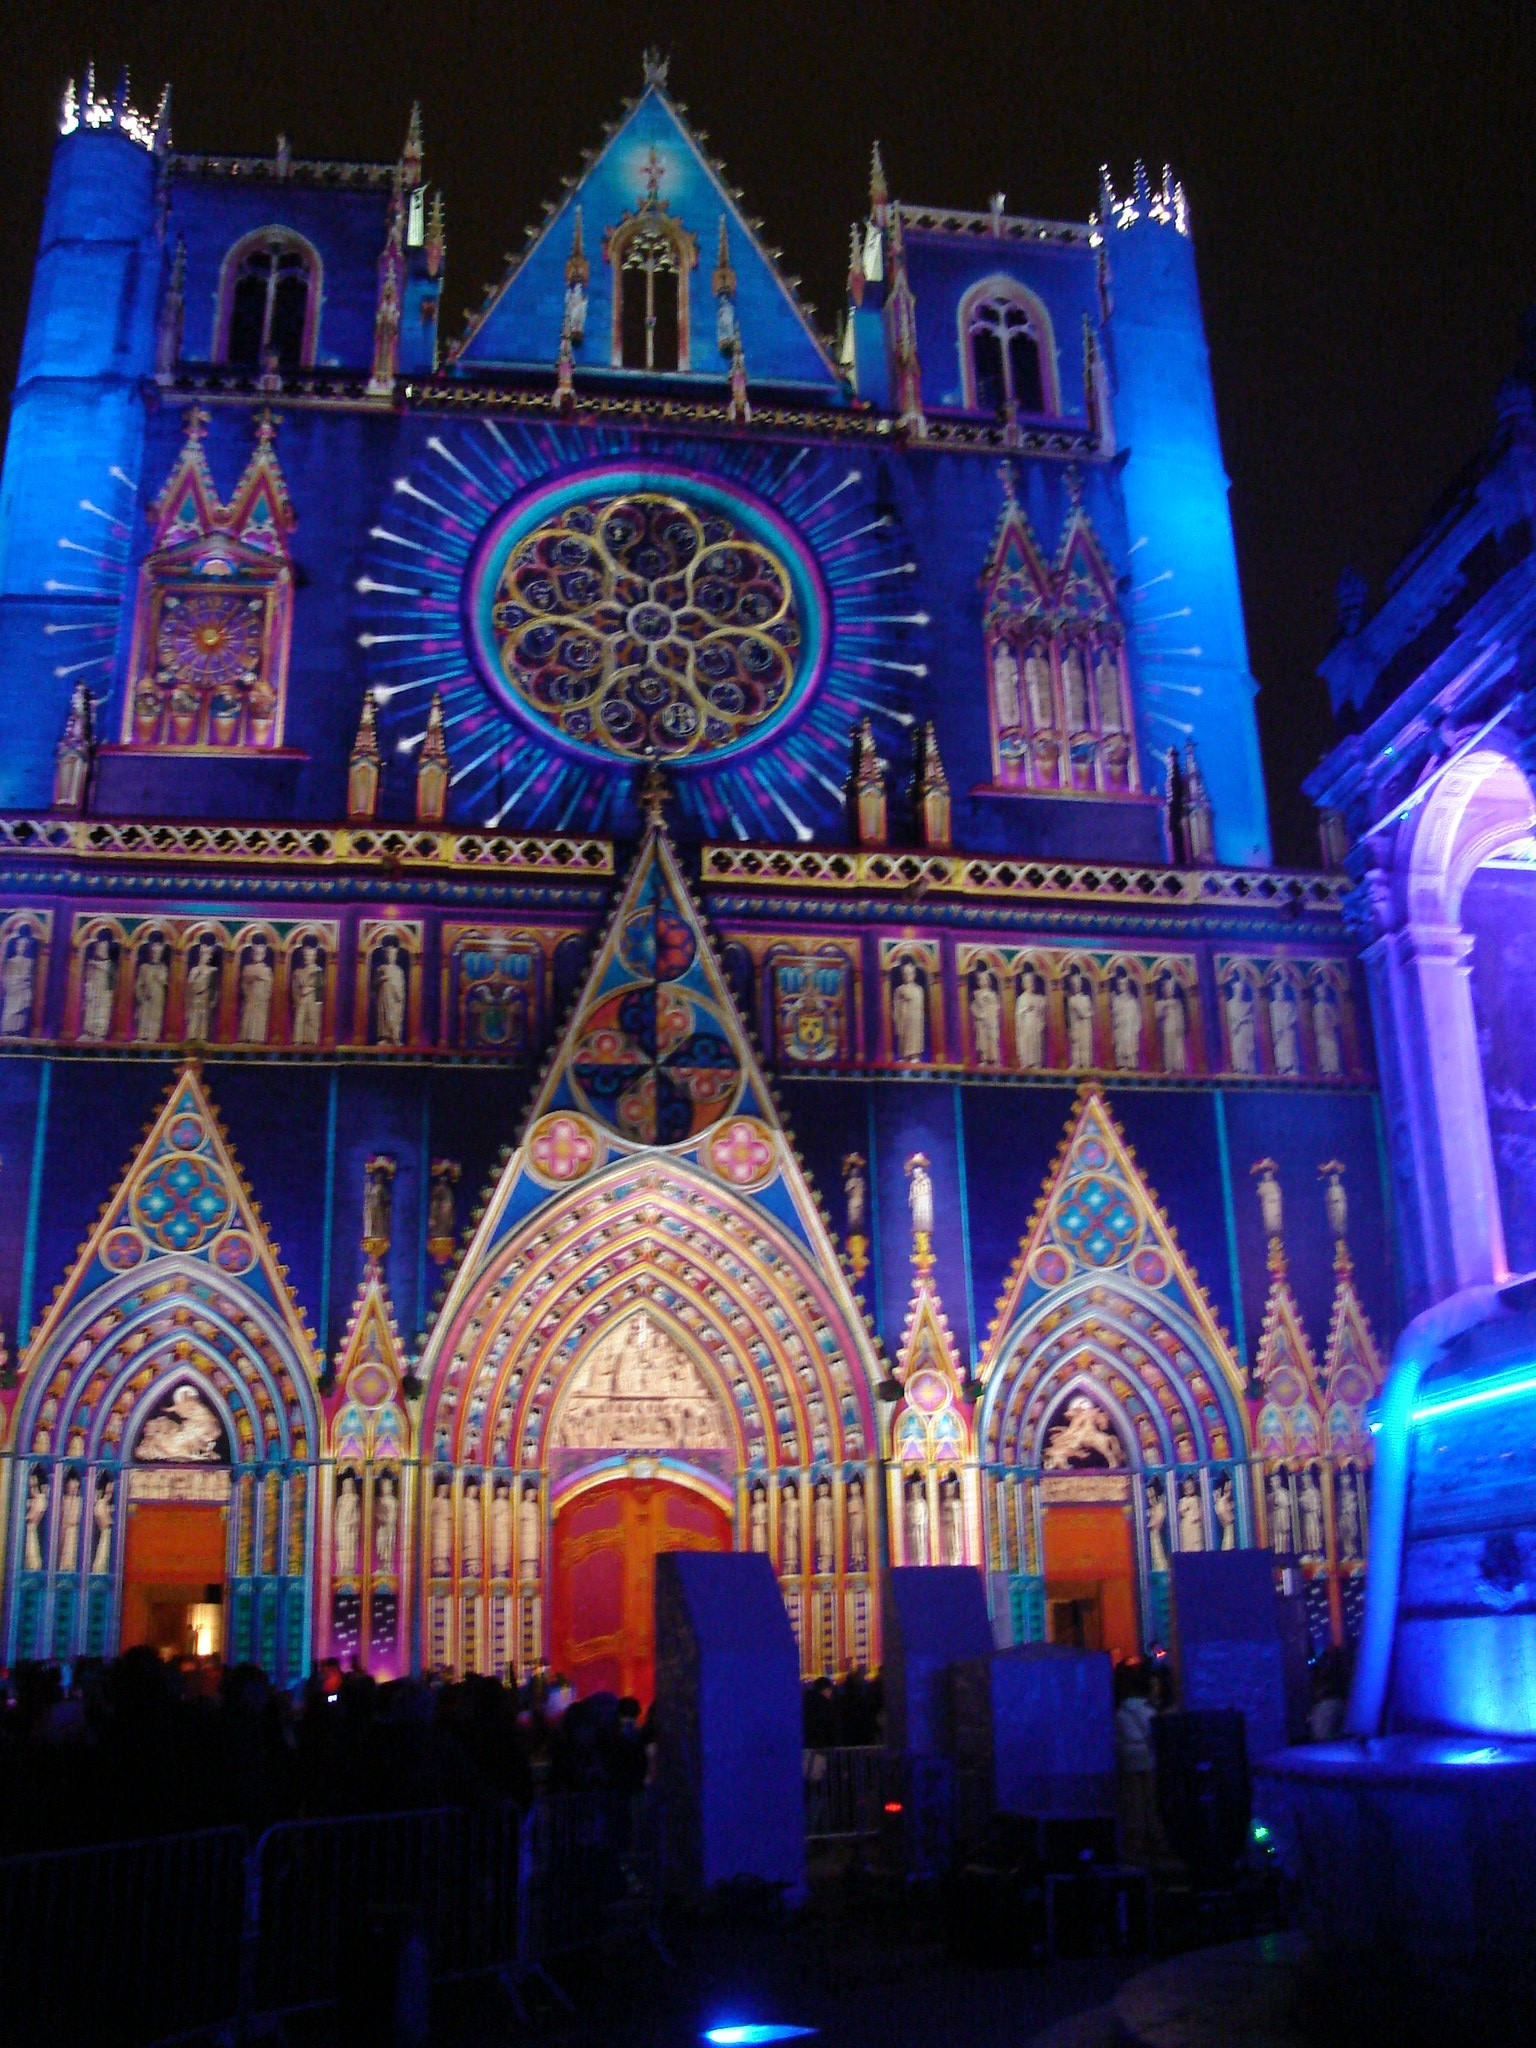 Professional 3D Video Mapping